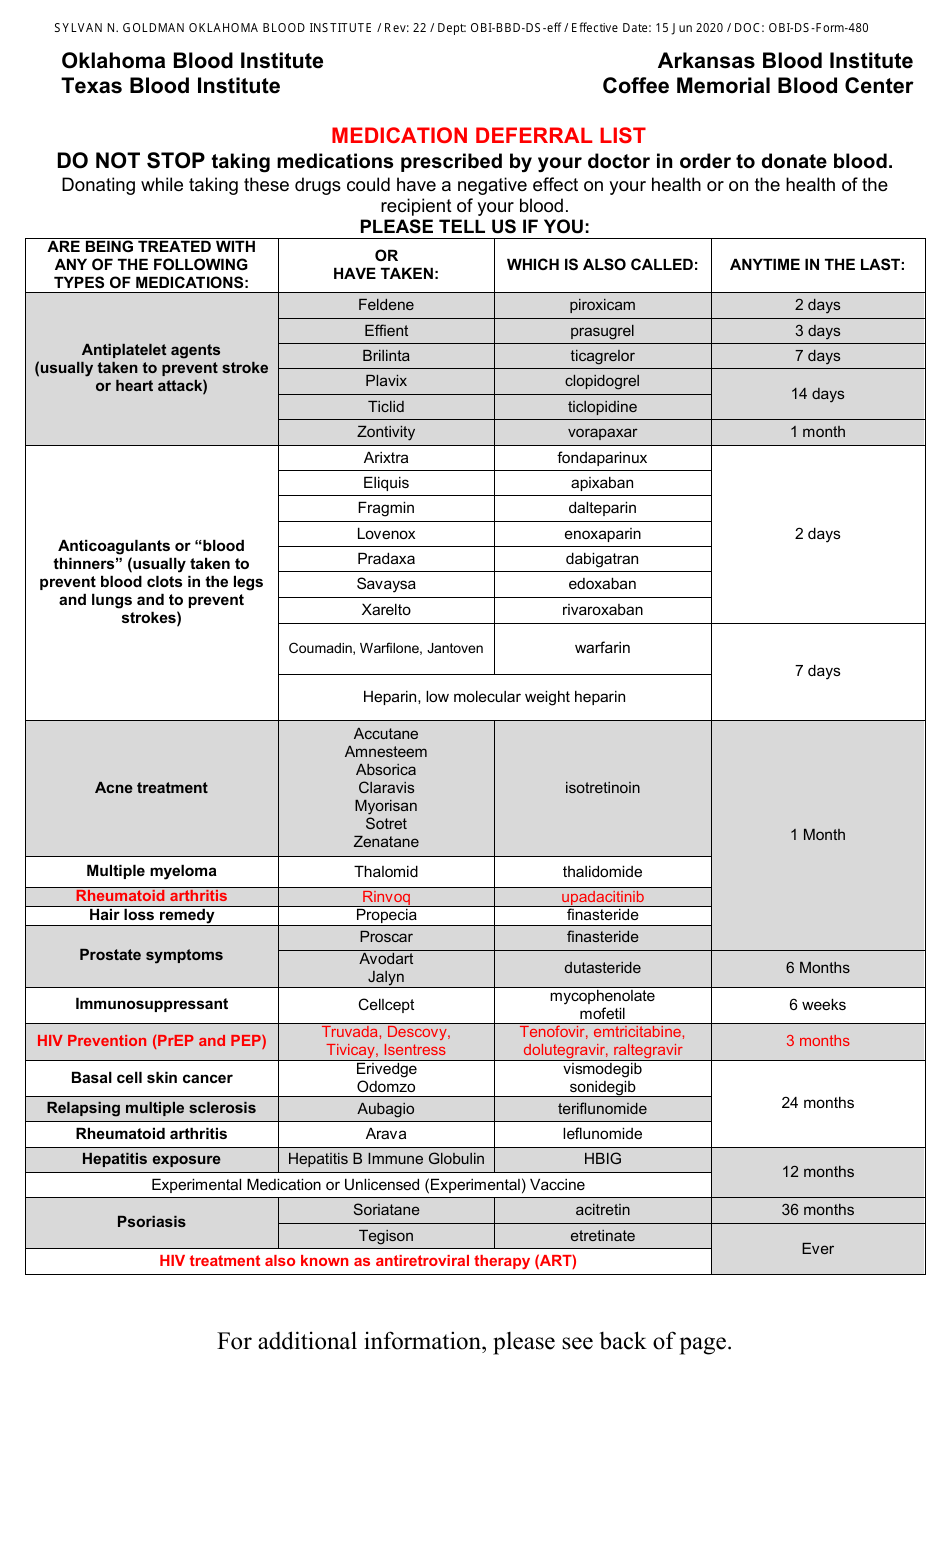 Medication Deferral List - View preview for below document